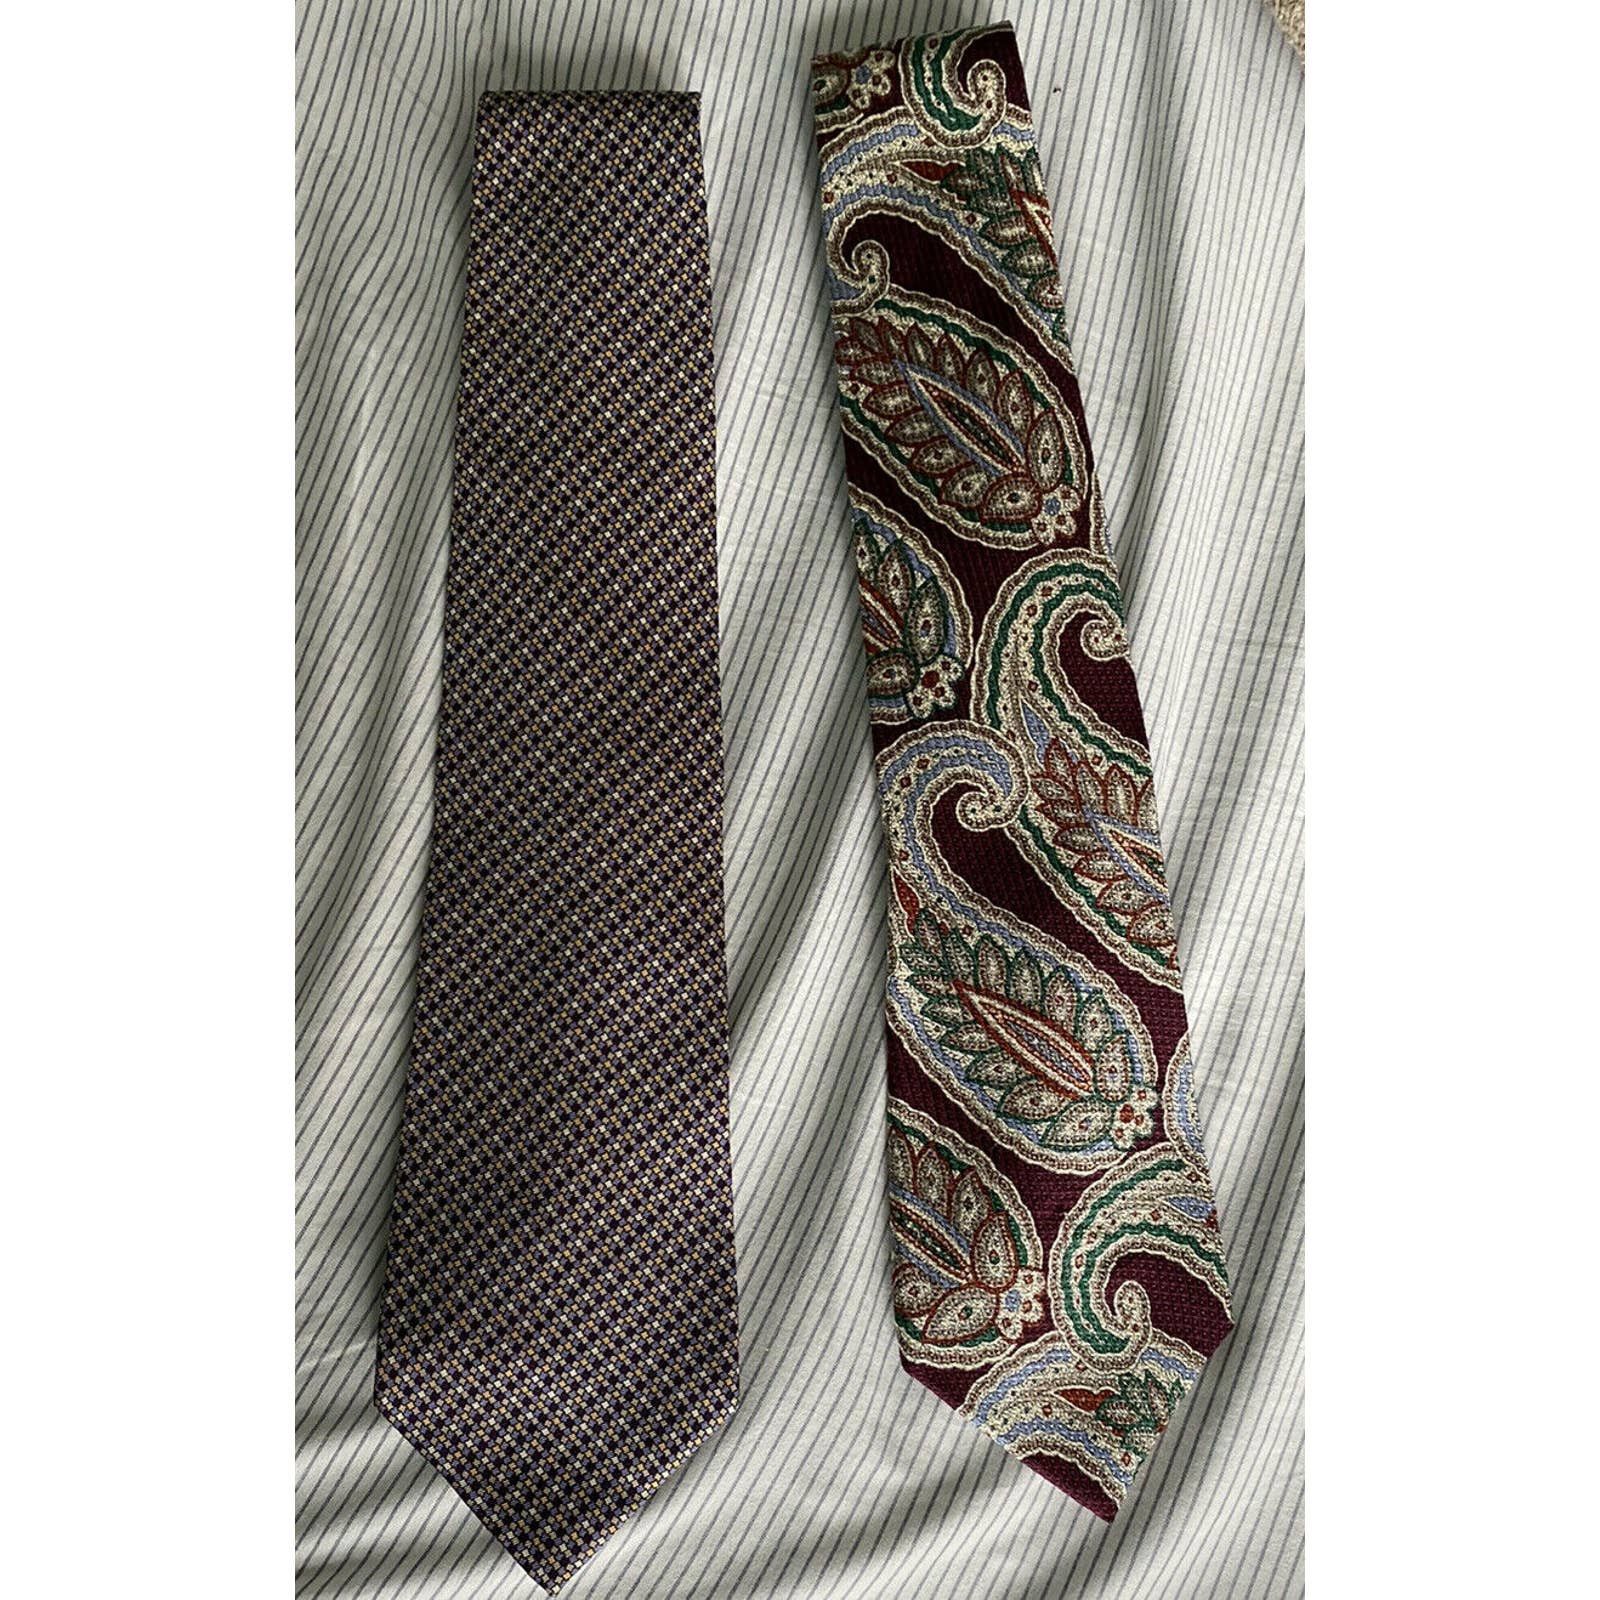 Burberry Burberry Vintage Silk Ties Made In The USA Size ONE SIZE - 2 Preview